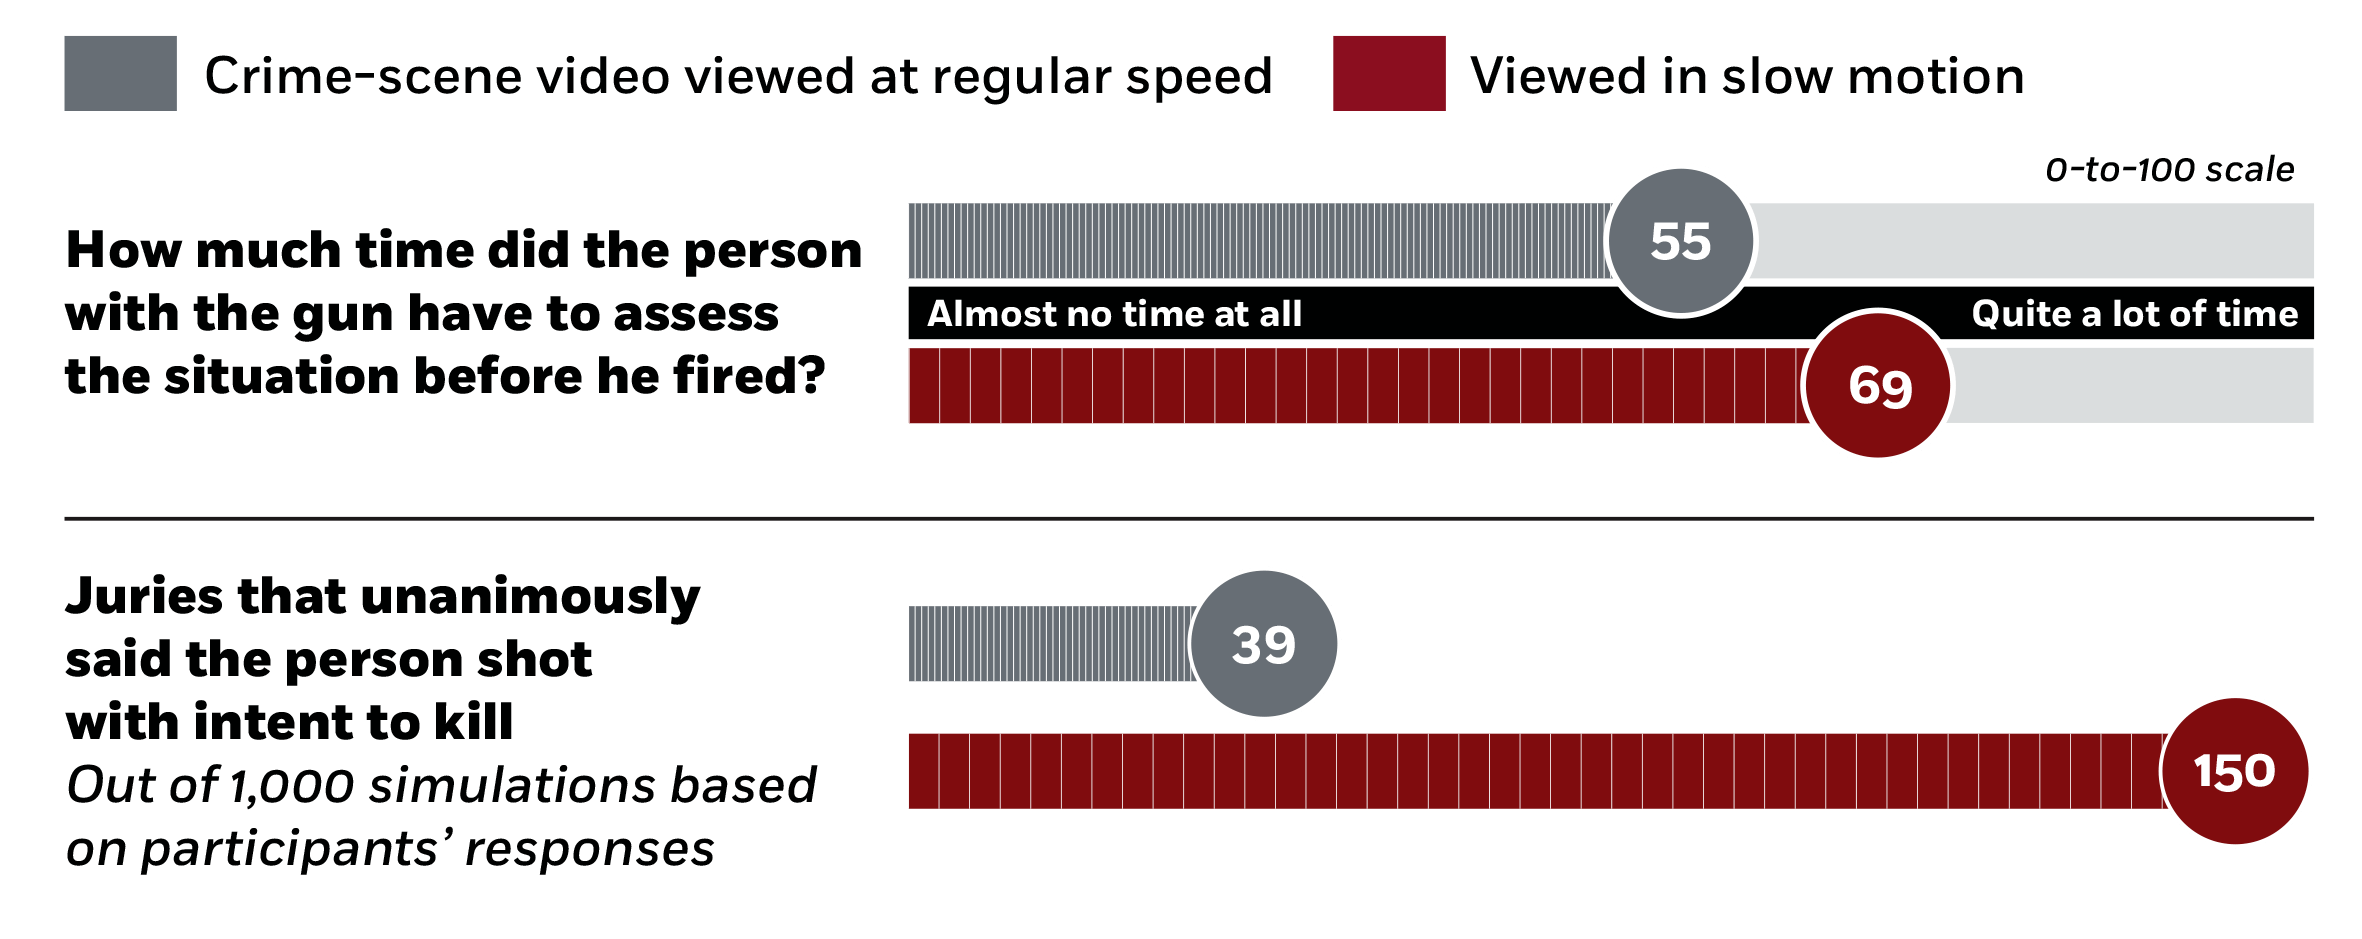 A bar chart plotting study participants’ ratings of how much time a person in a crime-scene video had to assess the situation before firing. On a scale of zero, meaning almost no time at all, to one hundred, meaning quite a lot of time, people who viewed the video at regular speed gave it a fifty-five, while those who viewed it in slow motion gave it a sixty-nine. A second bar chart shows the results of a simulation in which thirty-nine out of one thousand juries unanimously said the person shot with intent to kill when the video was viewed at regular speed, while one hundred fifty juries did so when it was viewed in slow motion.